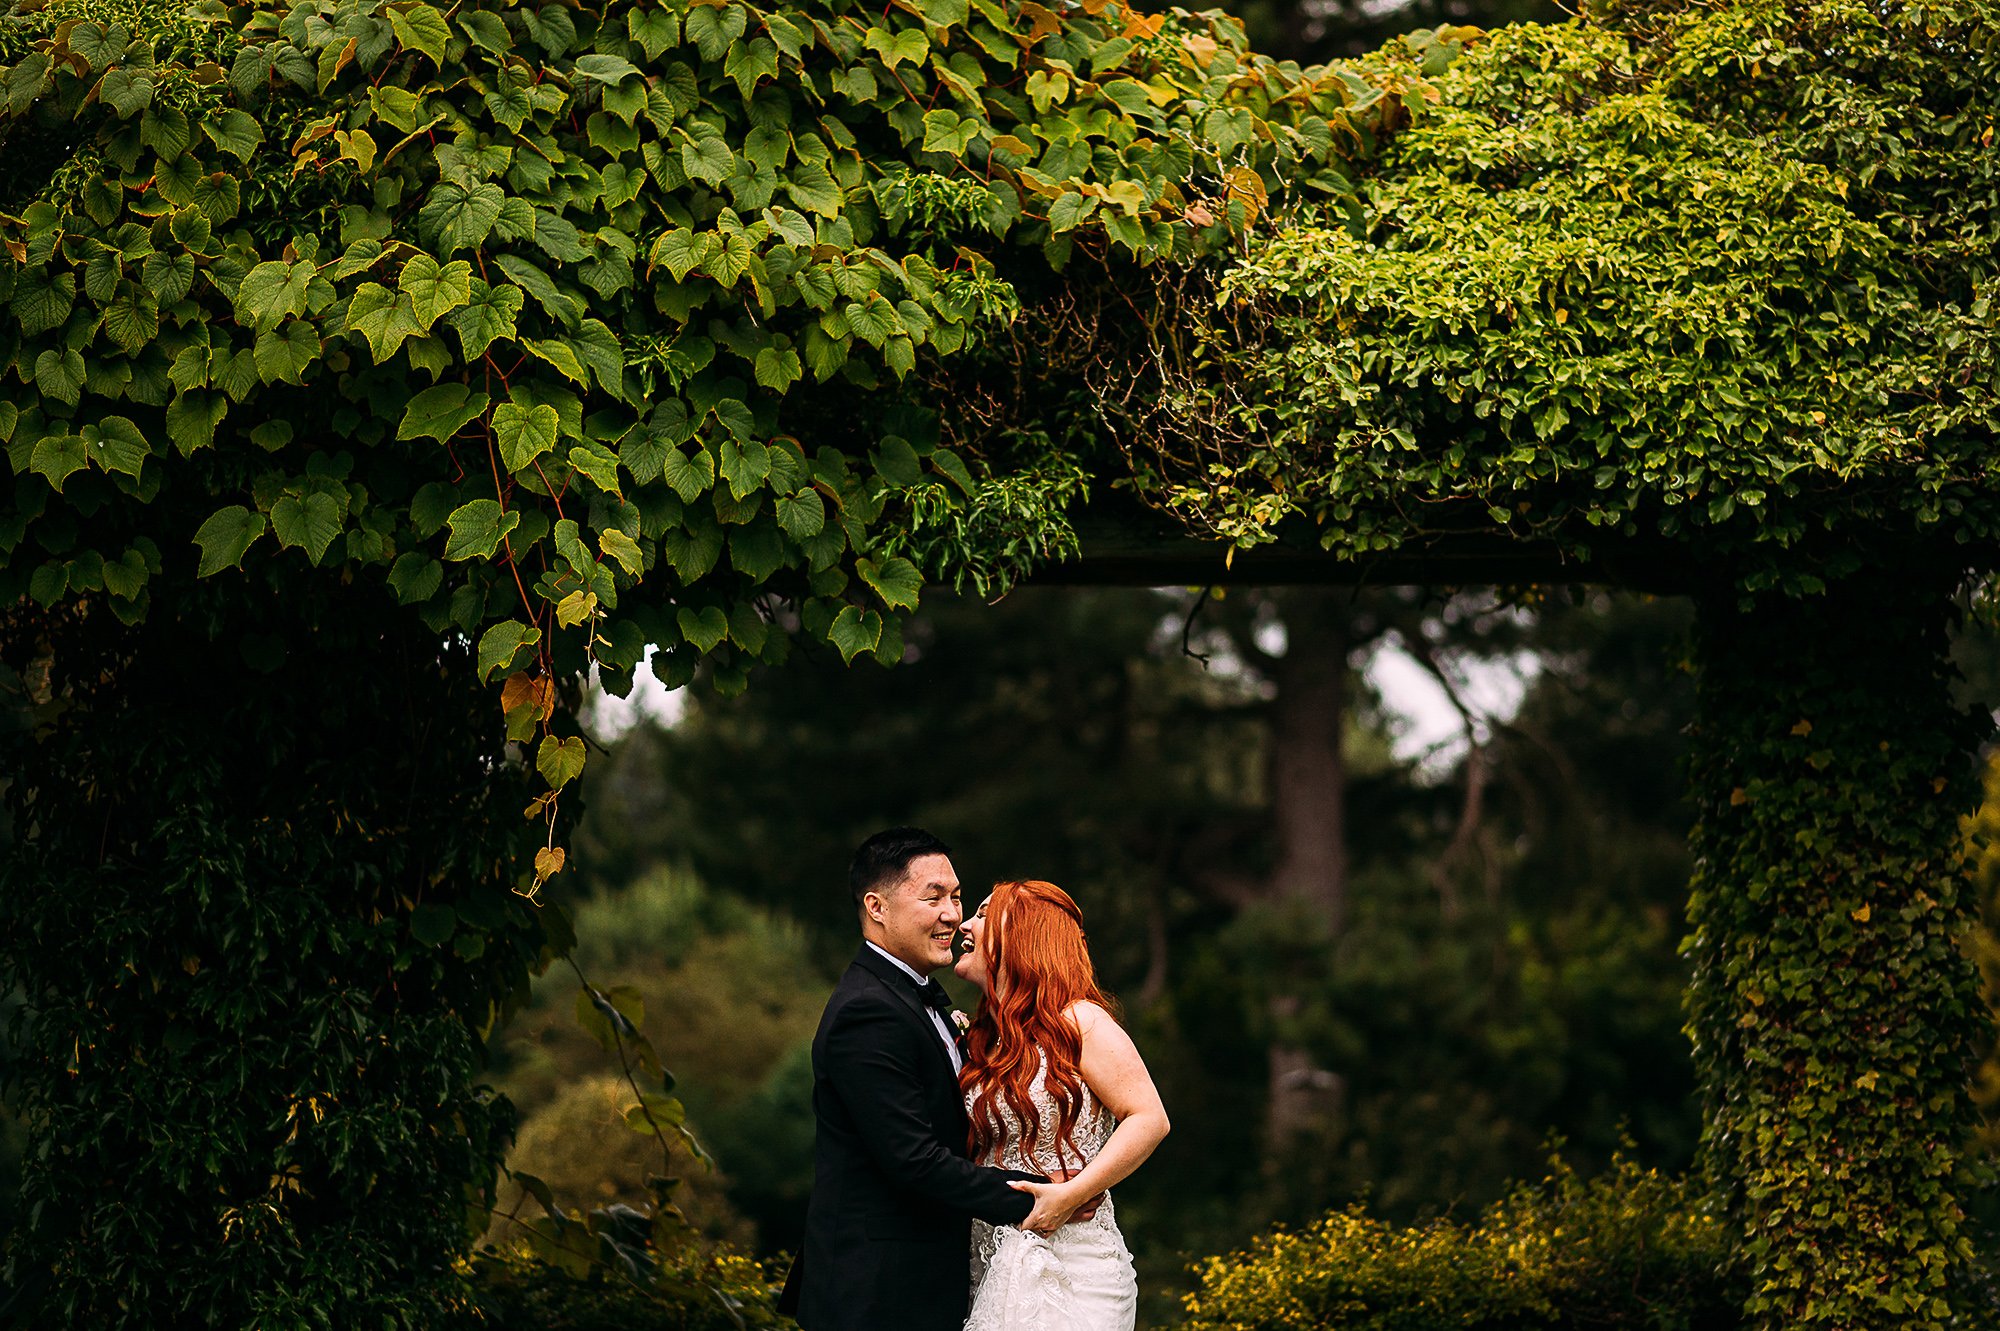  Couple shot at Thornton Manor. Red hair stands out from the green trees. 